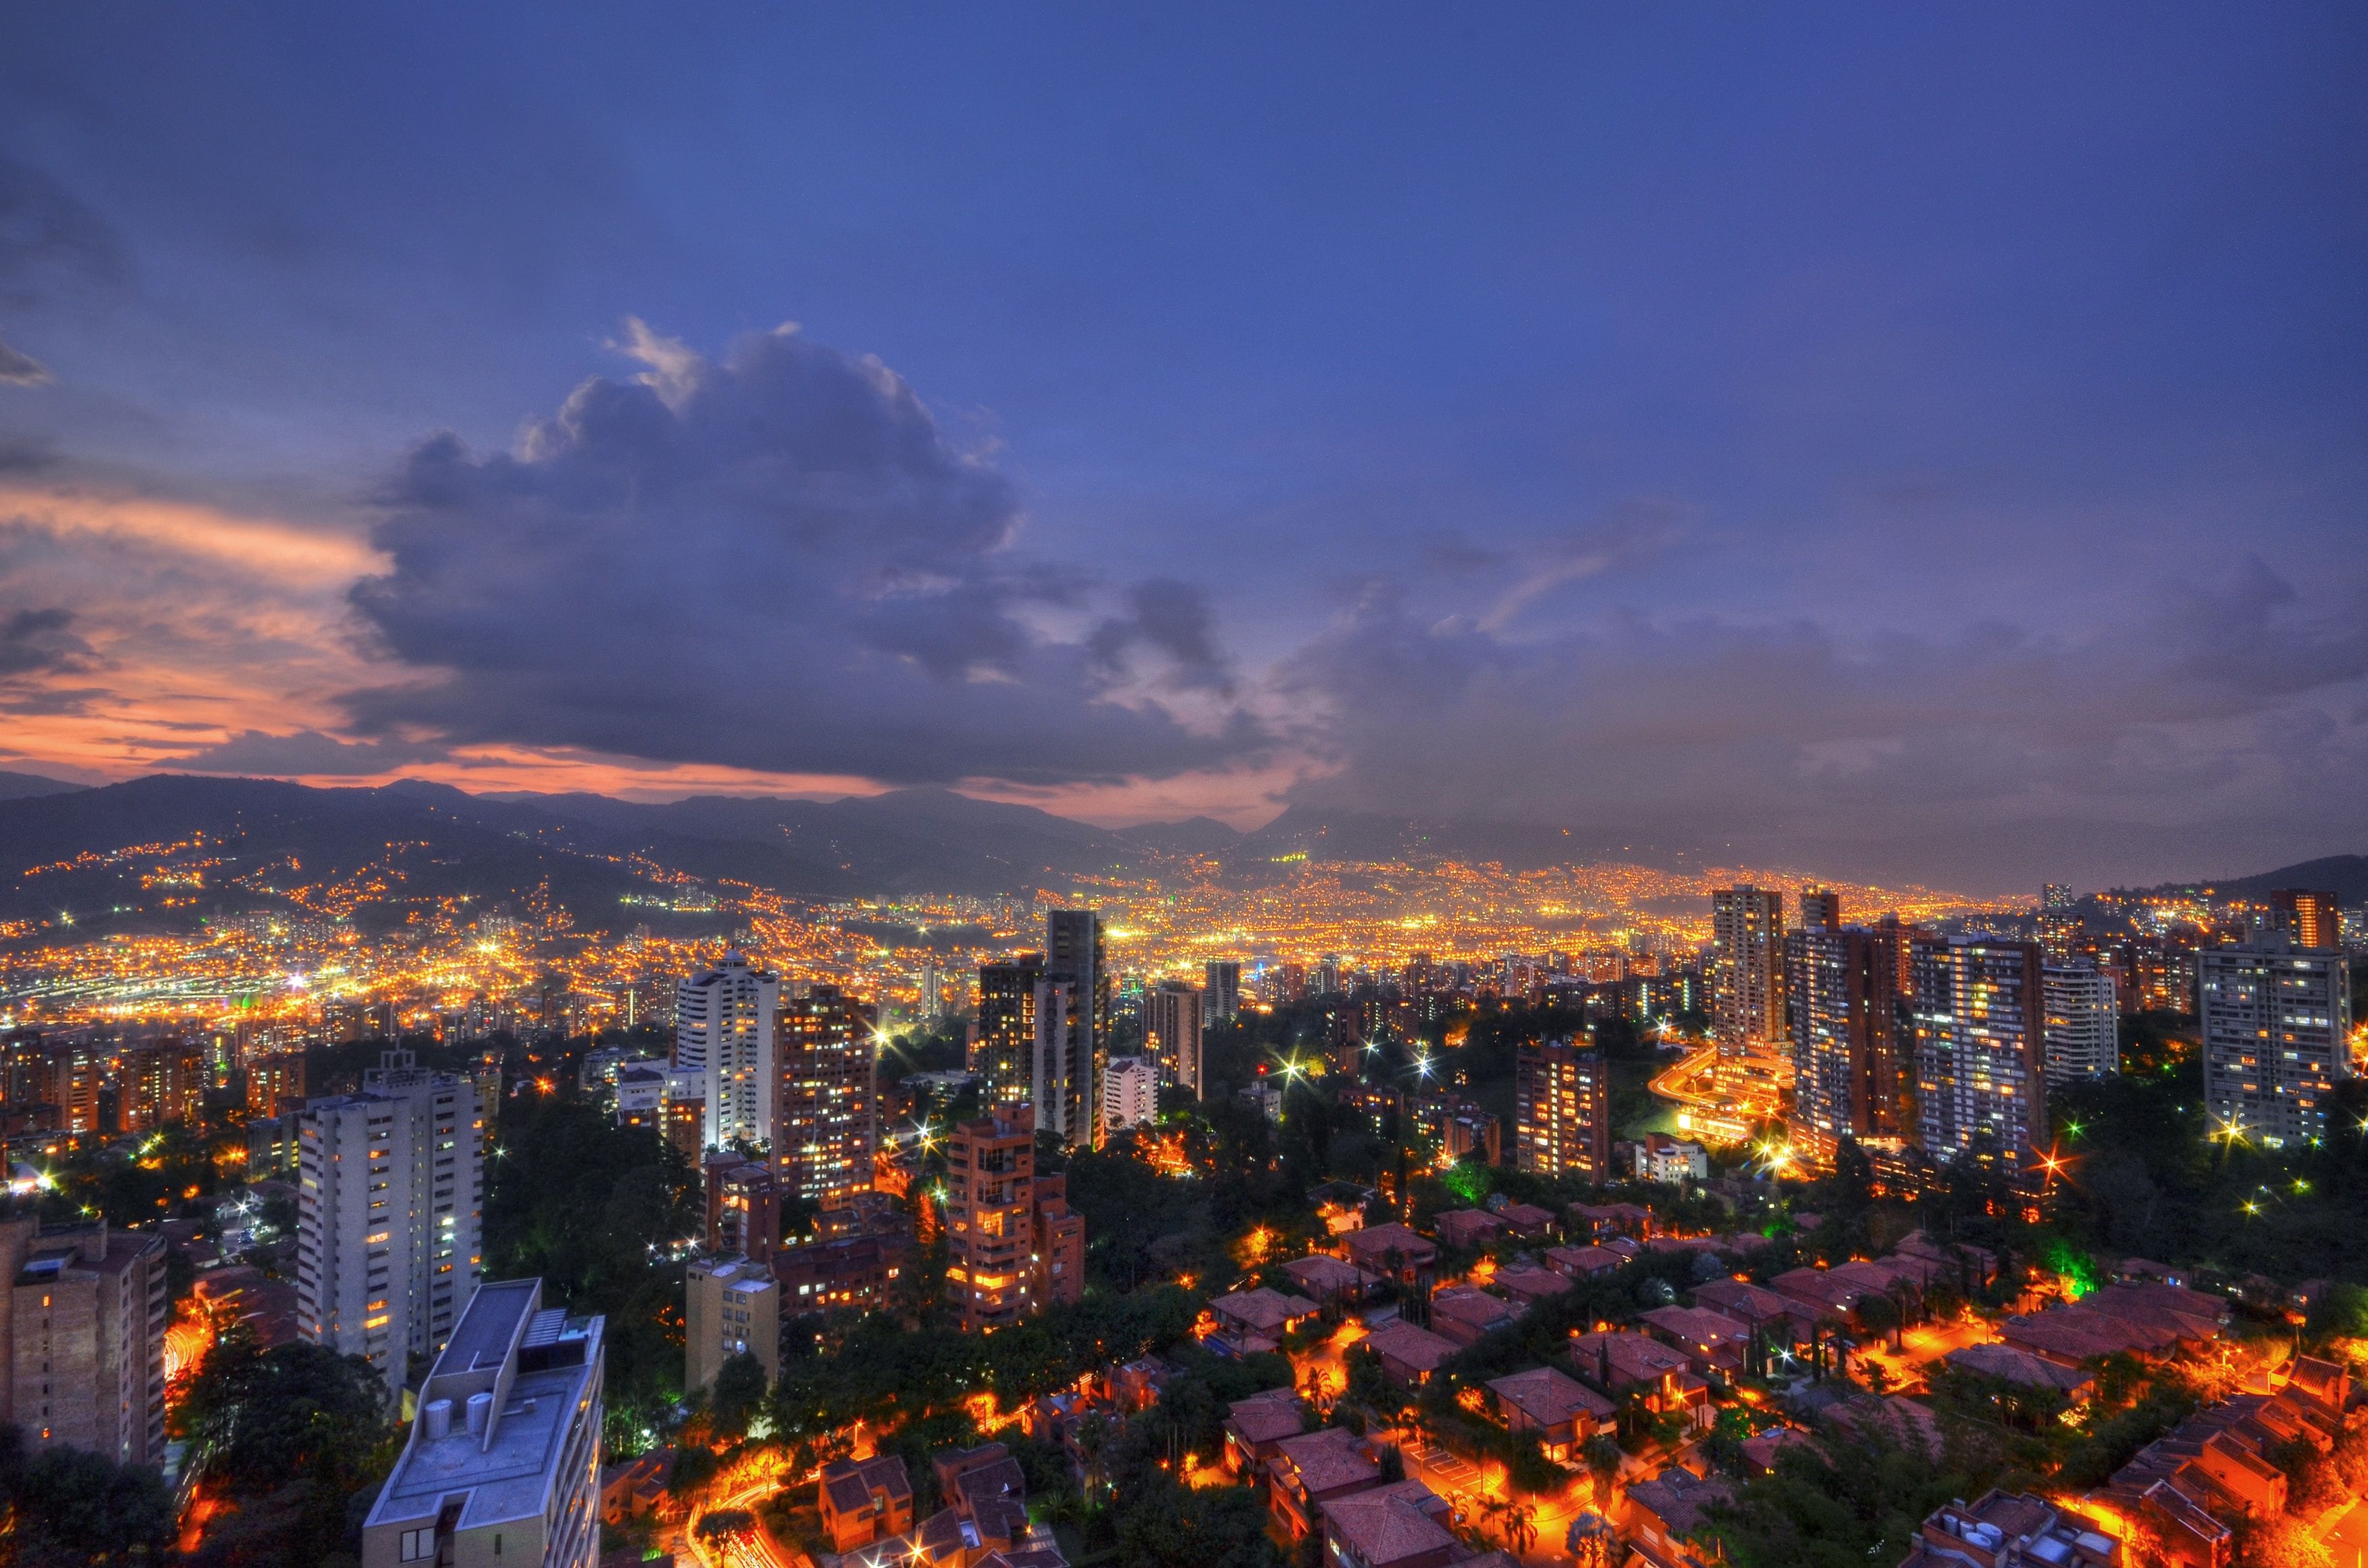 Striking view of Medellin at night in Colombia, one of the best countries for digital nomads